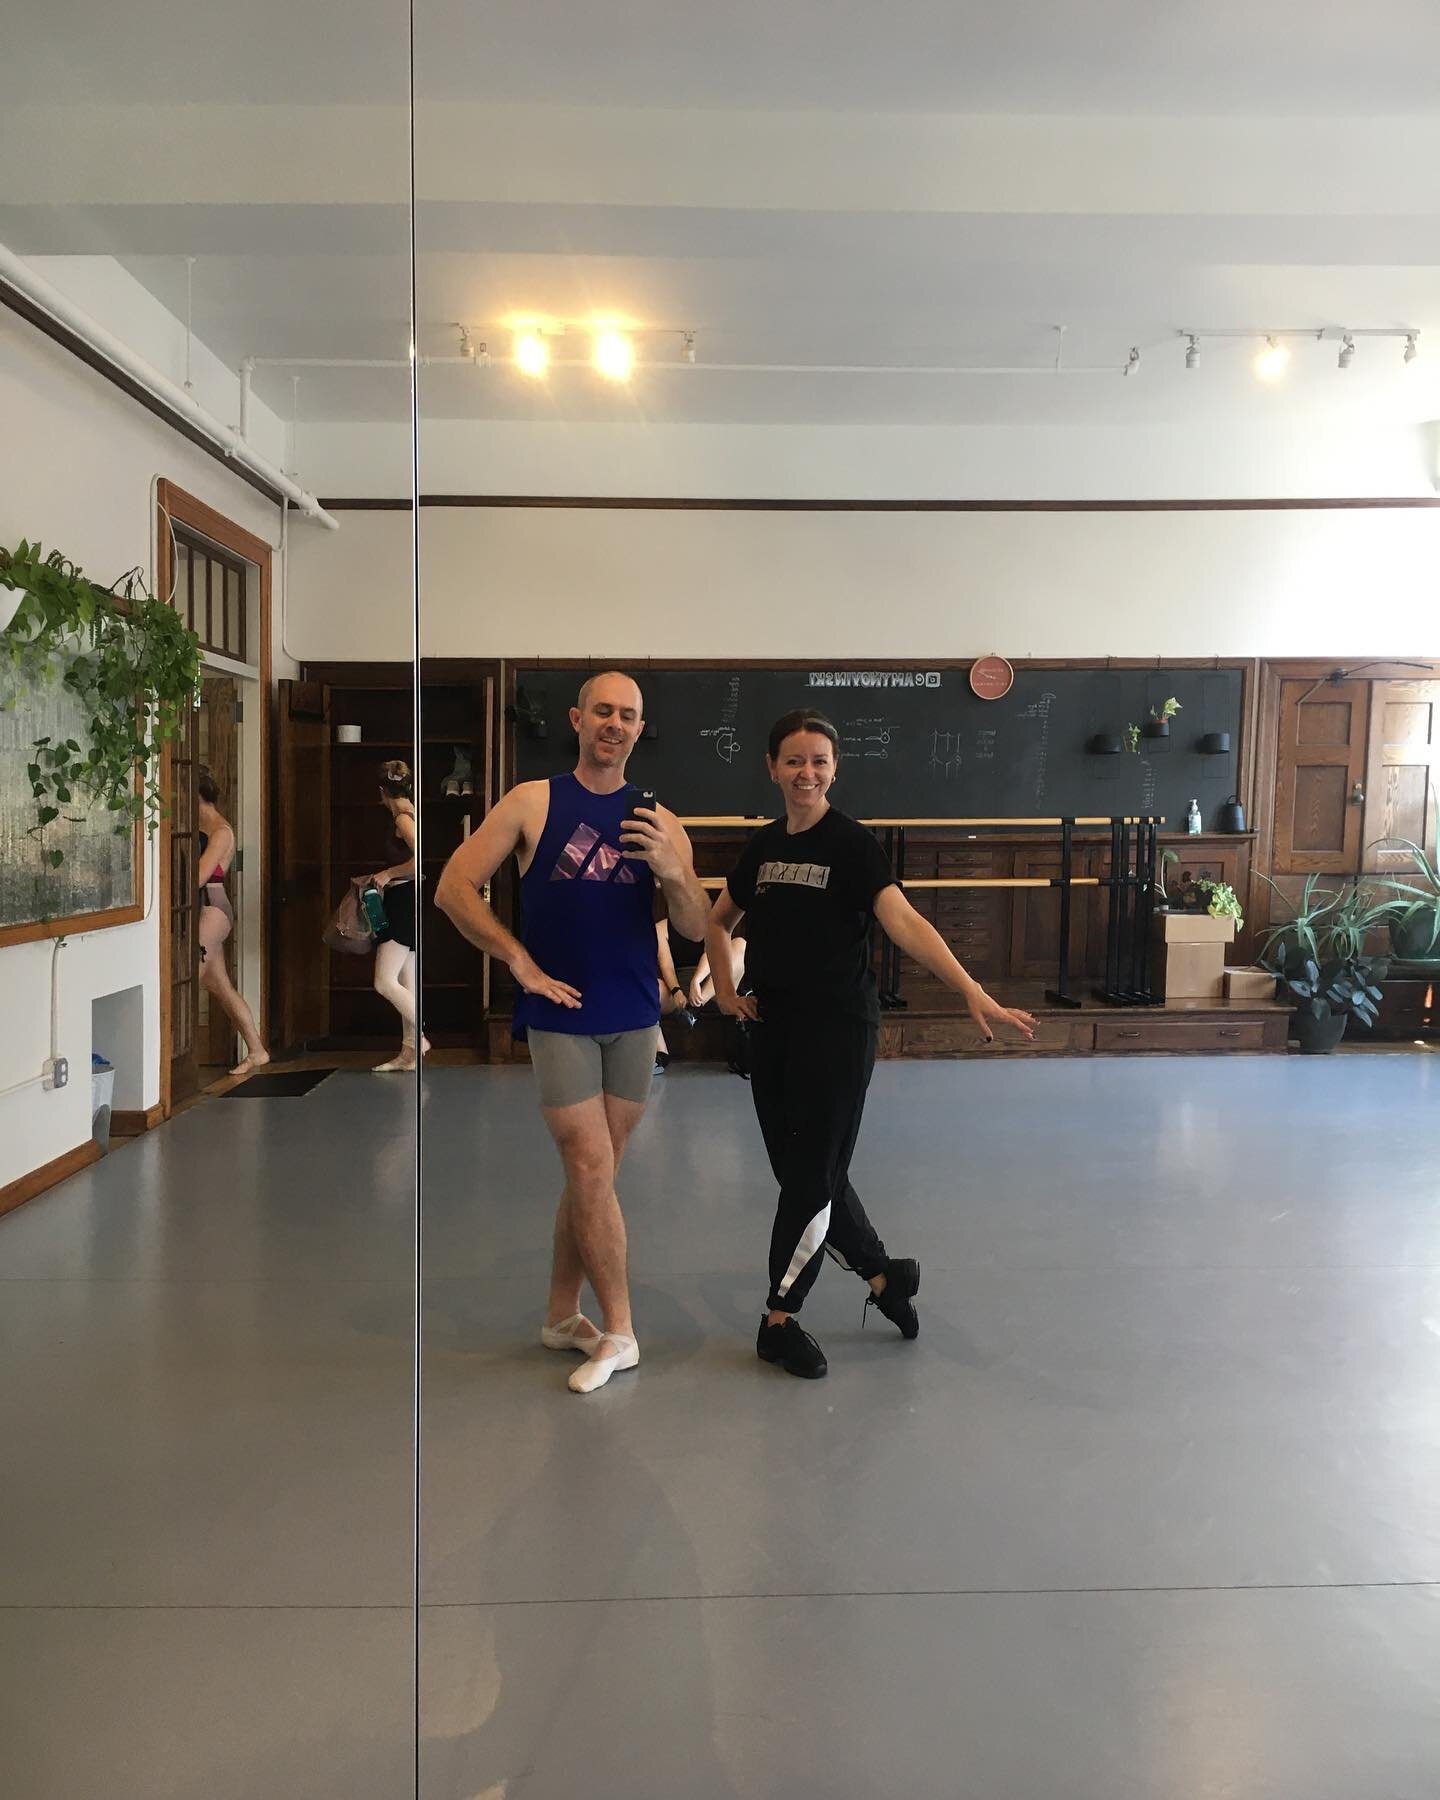 This summer I attended ballet class 5-6x a week in a small studio in the Bok Building taught by Amy Novinski. I learned to stand on my &lsquo;tripod' and 'point my feet,' and never spill 'my bucket of water.'

Every day Amy would give me more correct